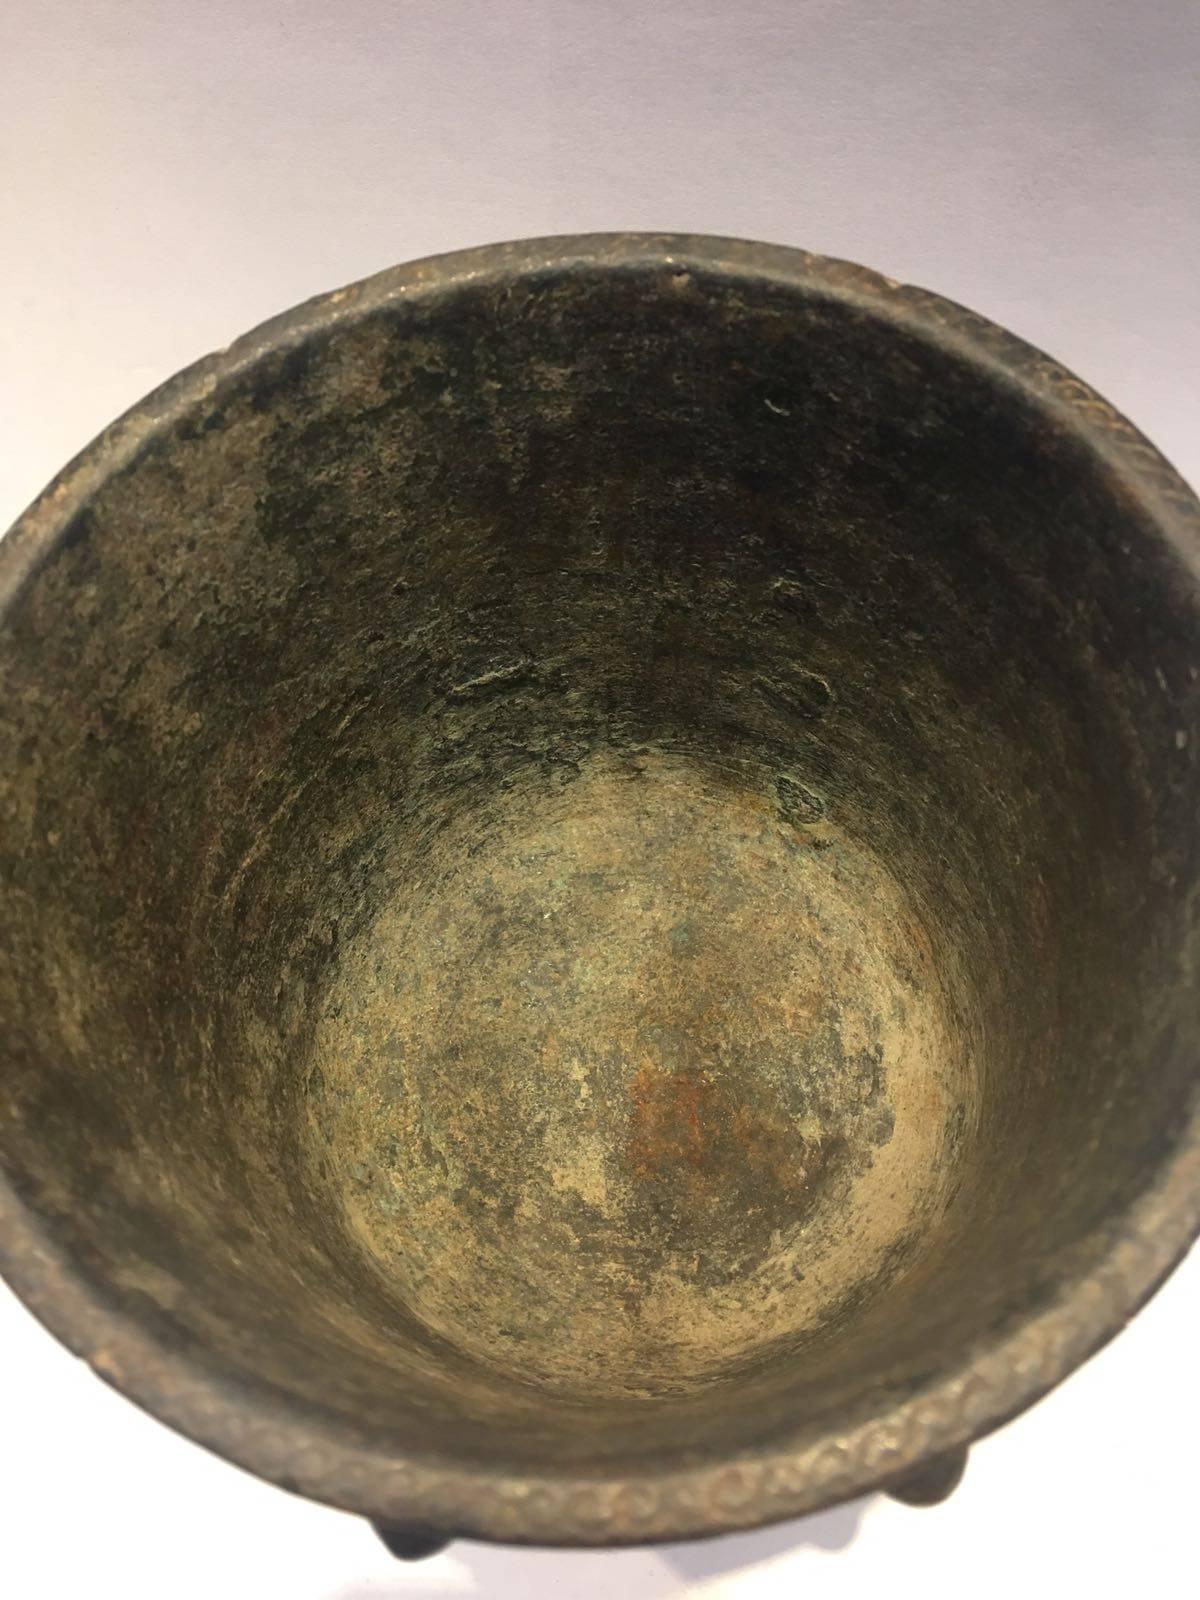 12th-13th century, A Khurasan bronze mortar, Persia. The body engraved with a calligraphic band near the rim, roundels containing interlacing stellar motifs against a ground of vegetal scrolls, between a pattern of teardrop motifs raised in